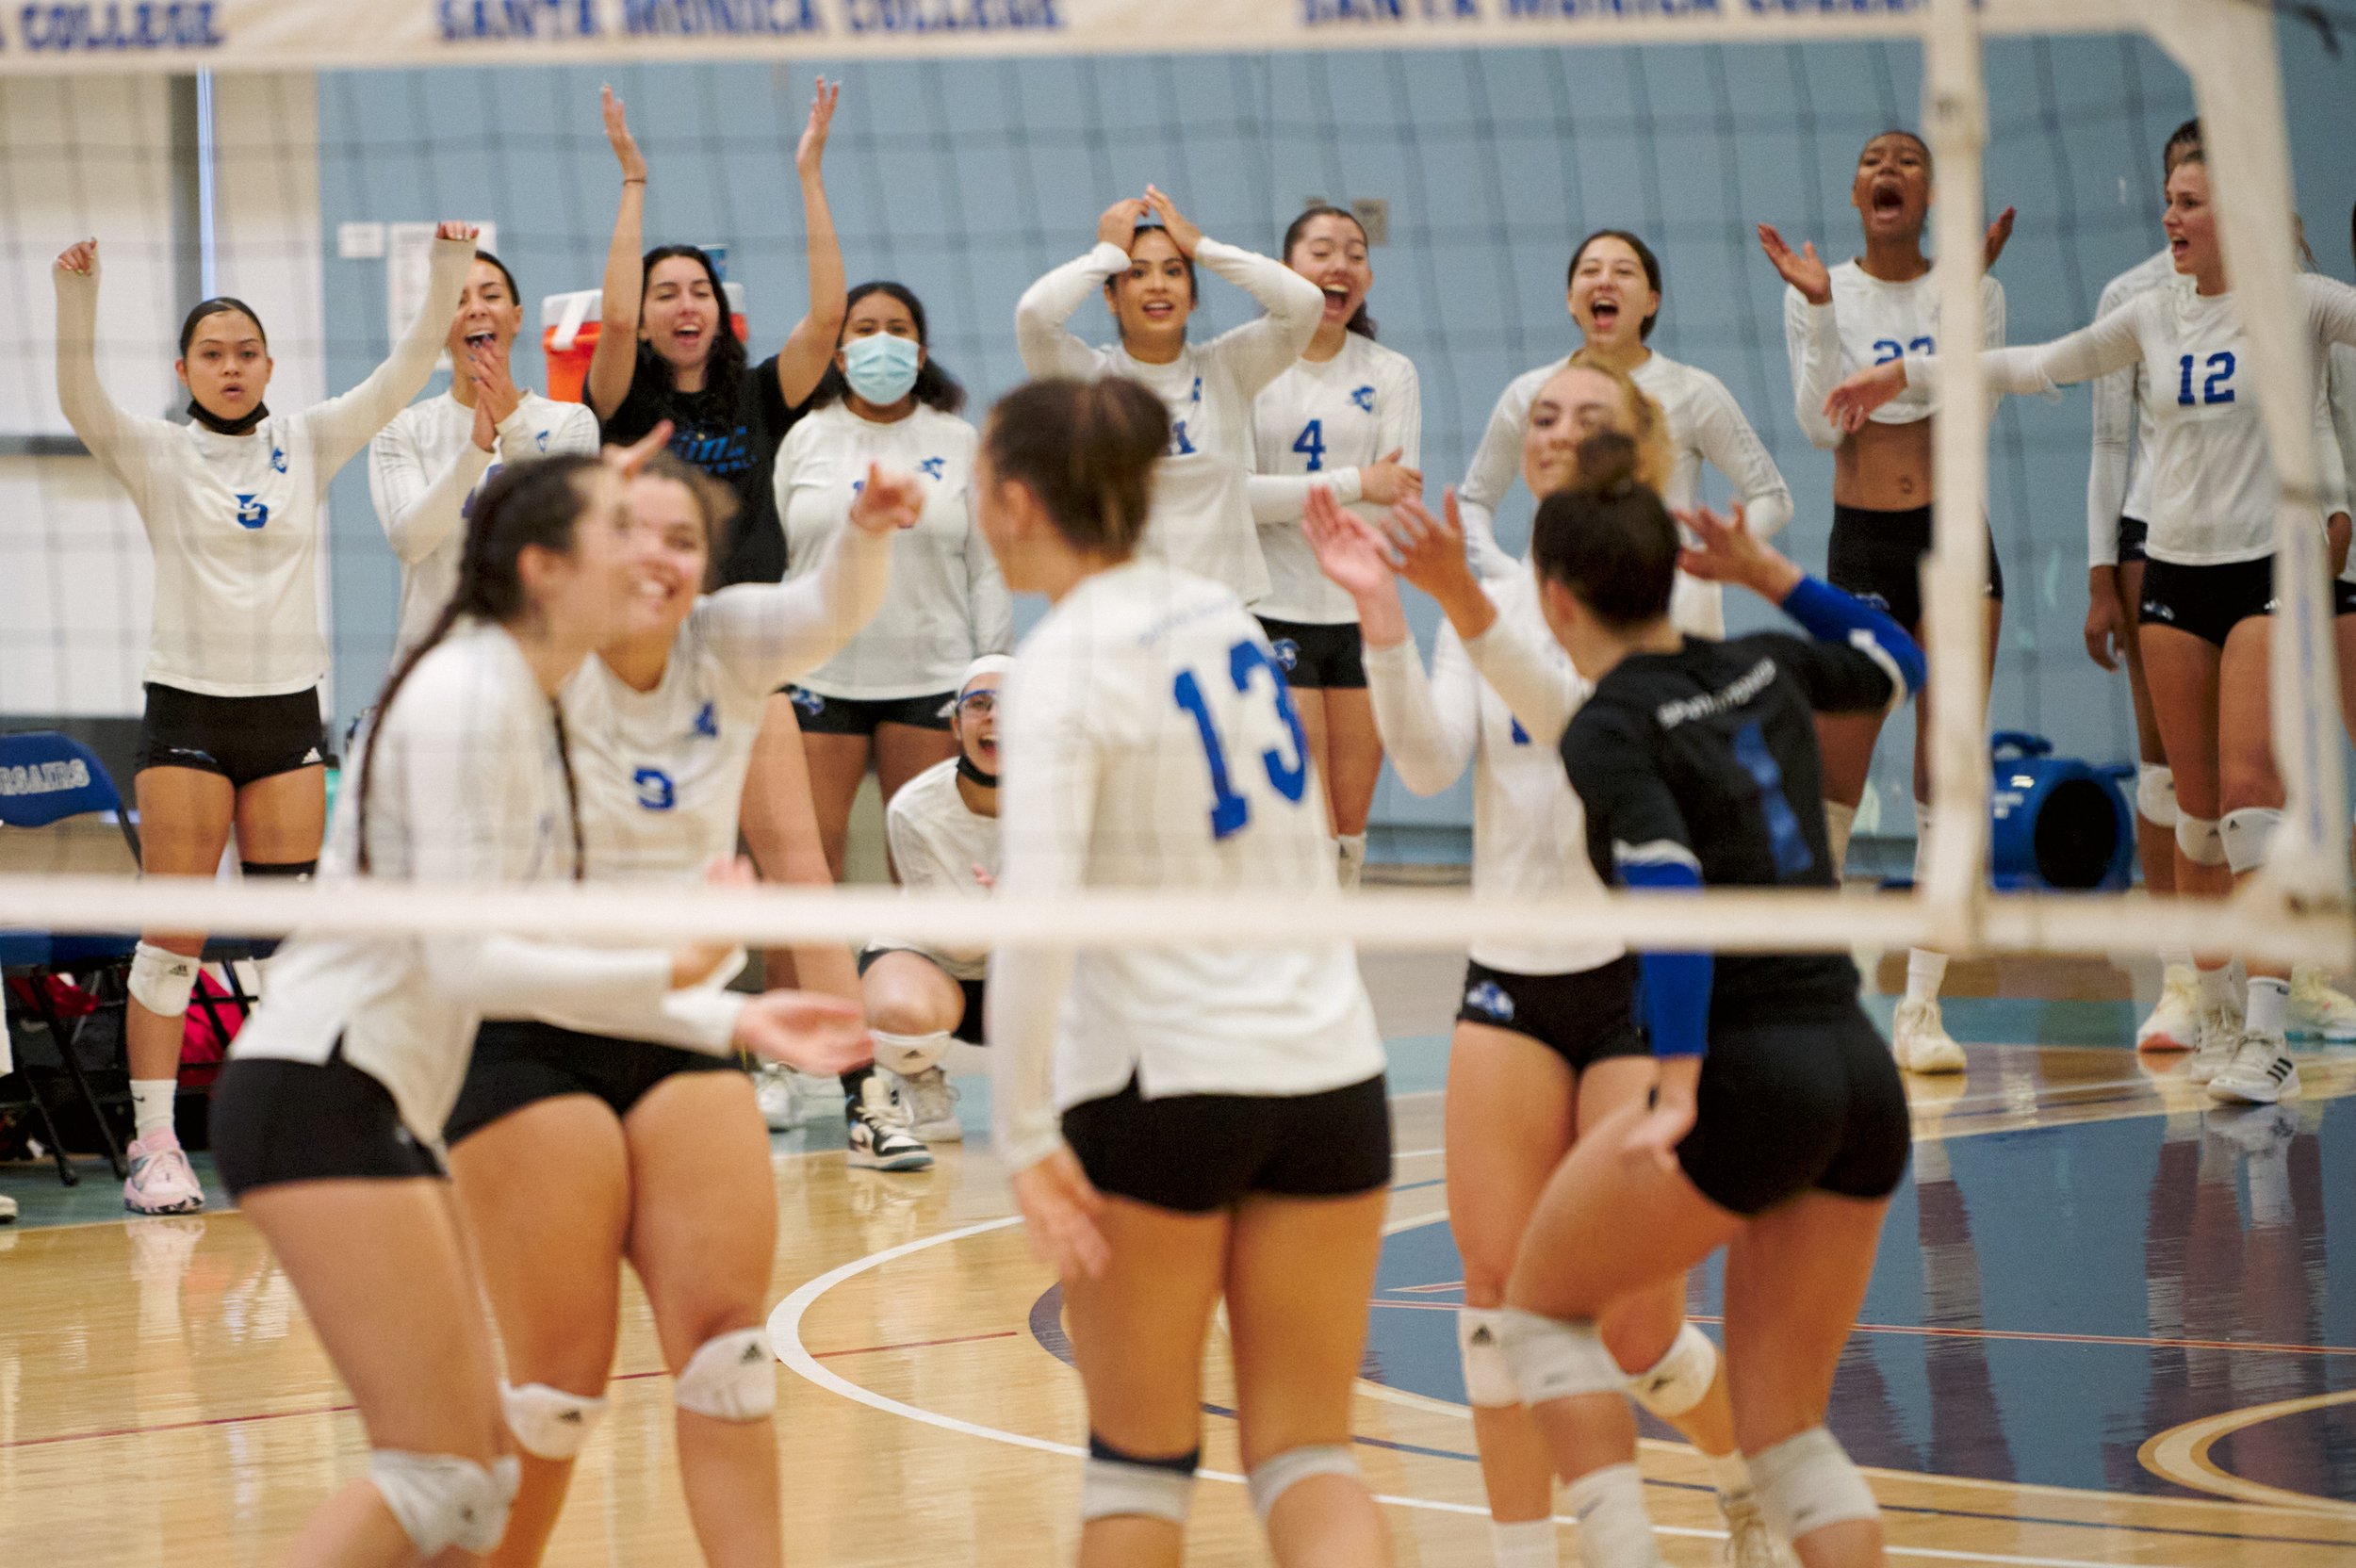  The Santa Monica College Corsairs Women's Volleyball team celebrates a point scored by Mackenzie Wolff against the College of the Desert Roadrunners on Friday, October 7, 2022, at the Corsair Gym in Santa Monica, Calif. The Corsairs won 3-2. (Nichol